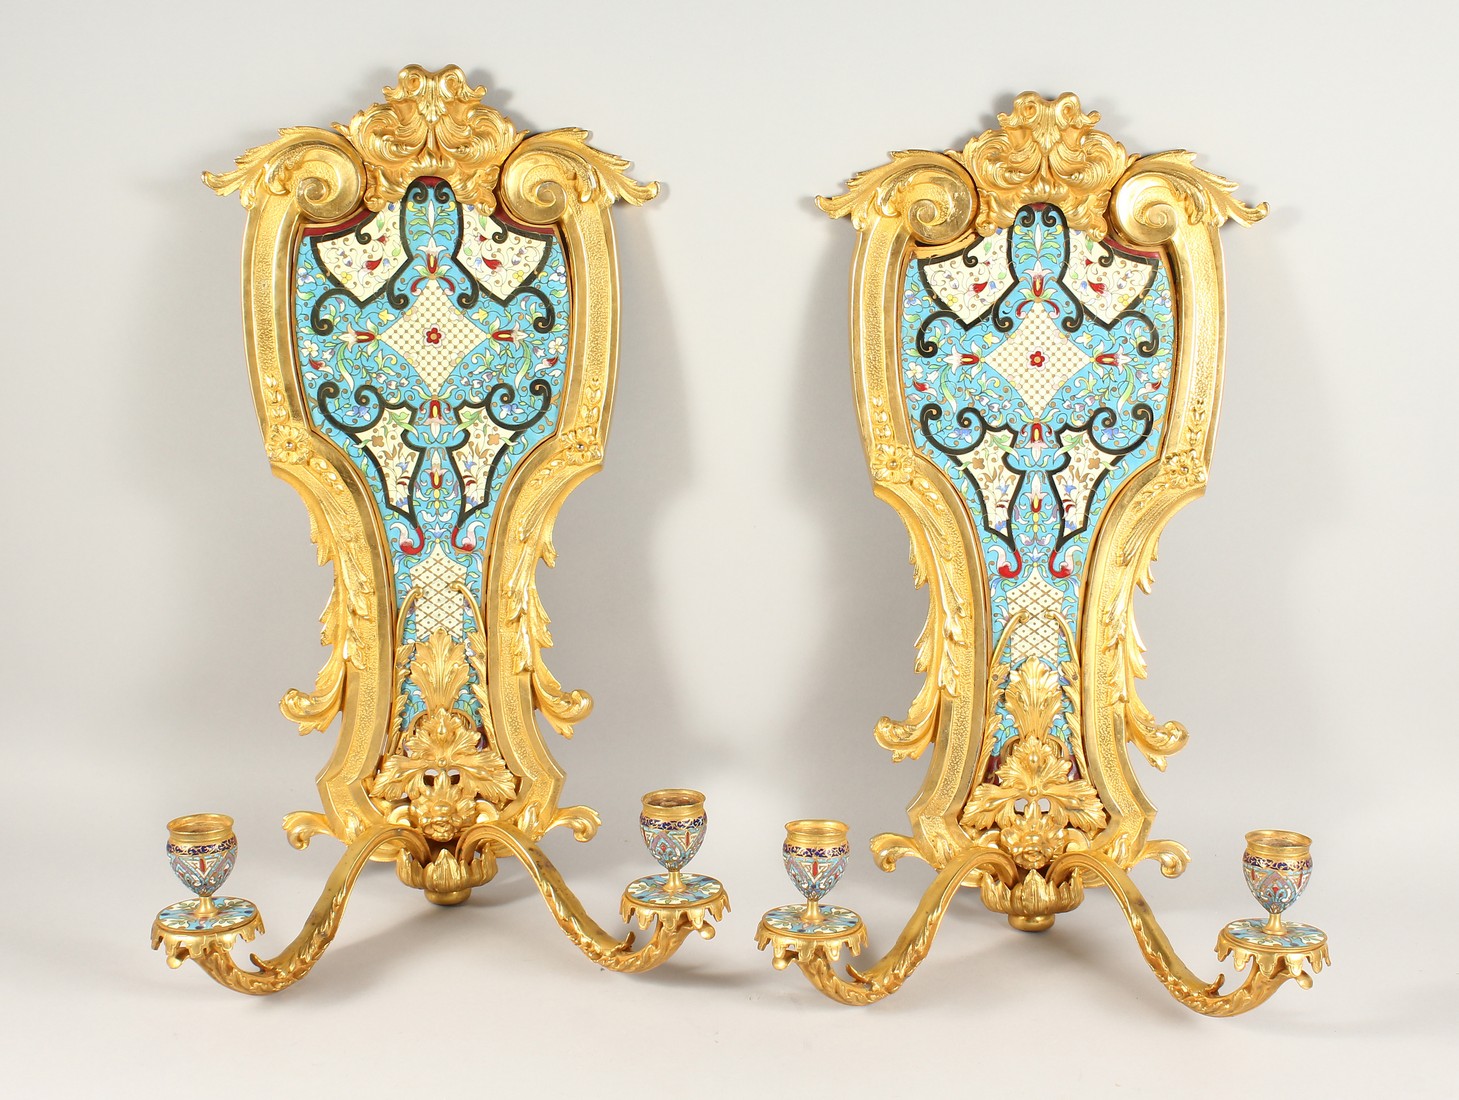 A SUPERB PAIR OF FRENCH ORMOLU AND ENAMEL TWO LIGHT WALL SCONCES WITH ACANTHUS AND SCROLLS 22ins